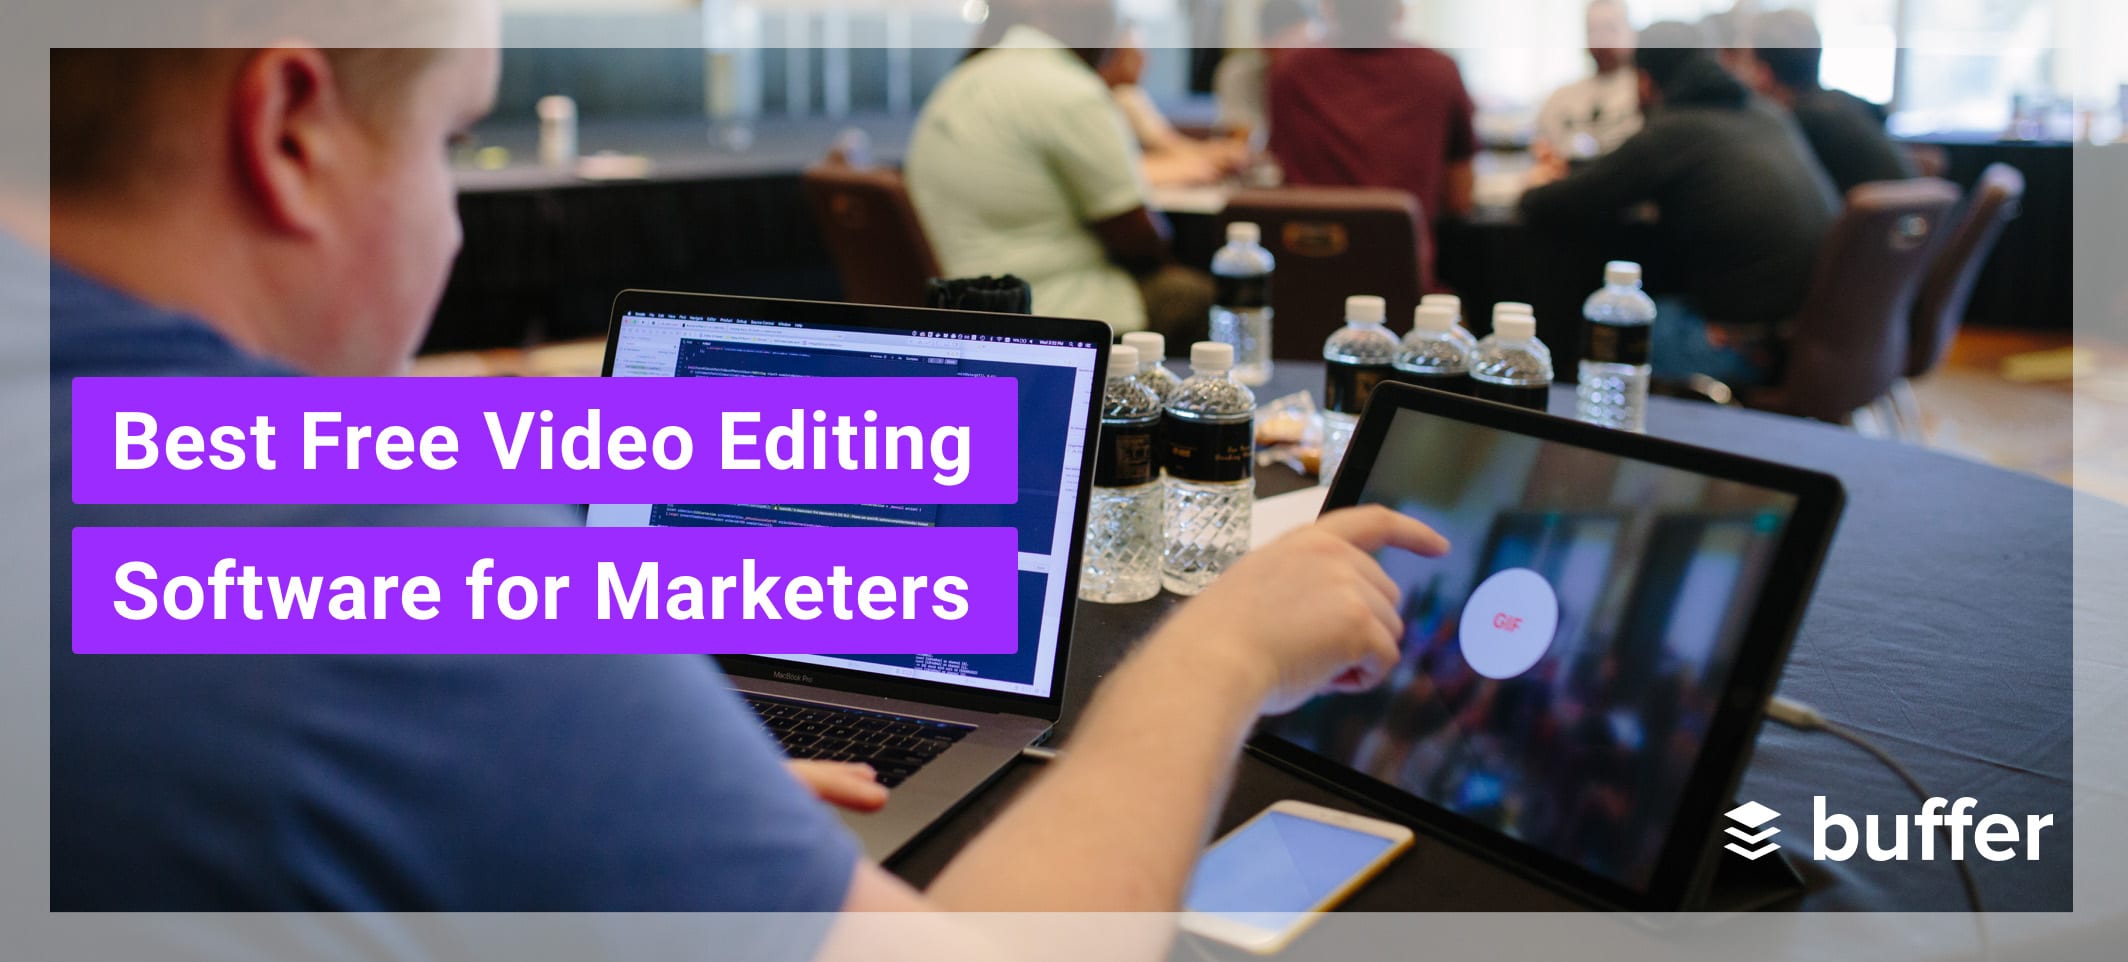 18 Best Free Video Editing Software for Marketers